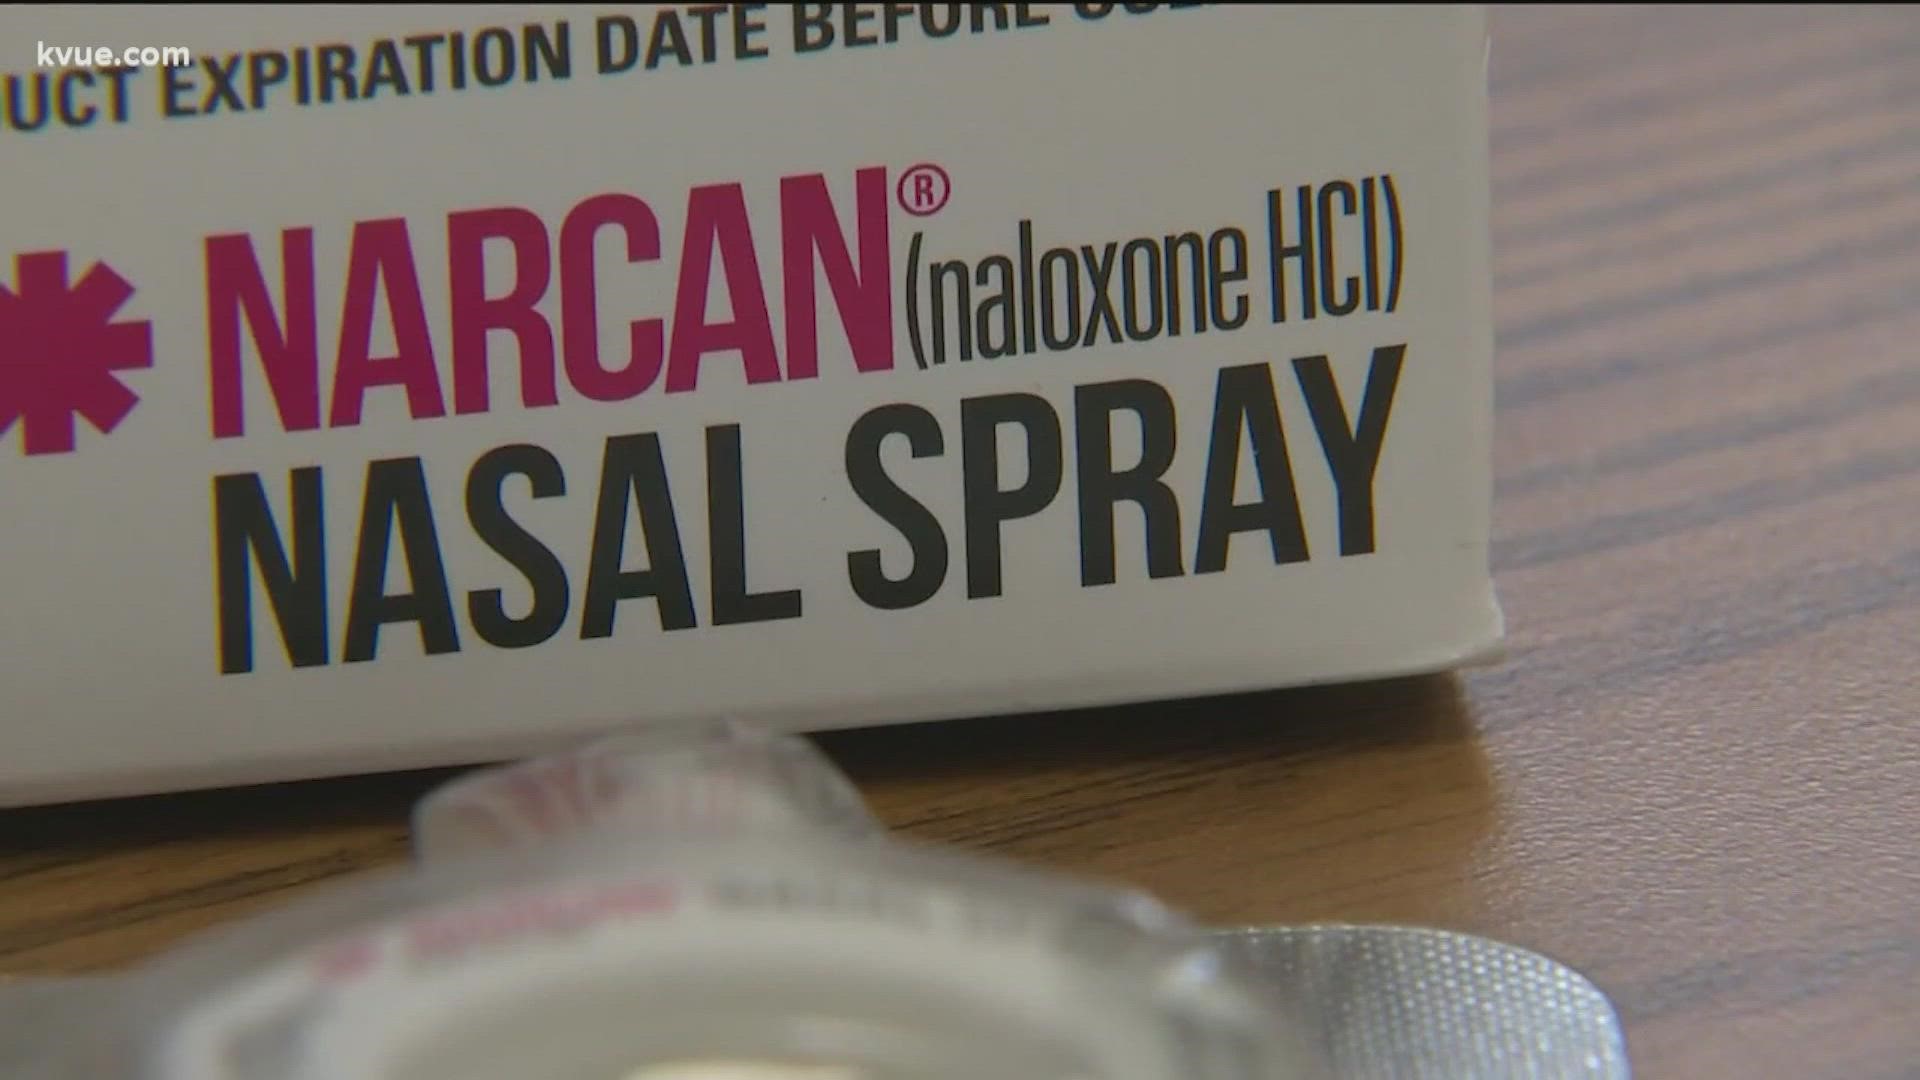 Austin police officers are getting their hands on a life-saving medication that can reverse the effects of an opioid overdose. KVUE's Bryce Newberry has the details.